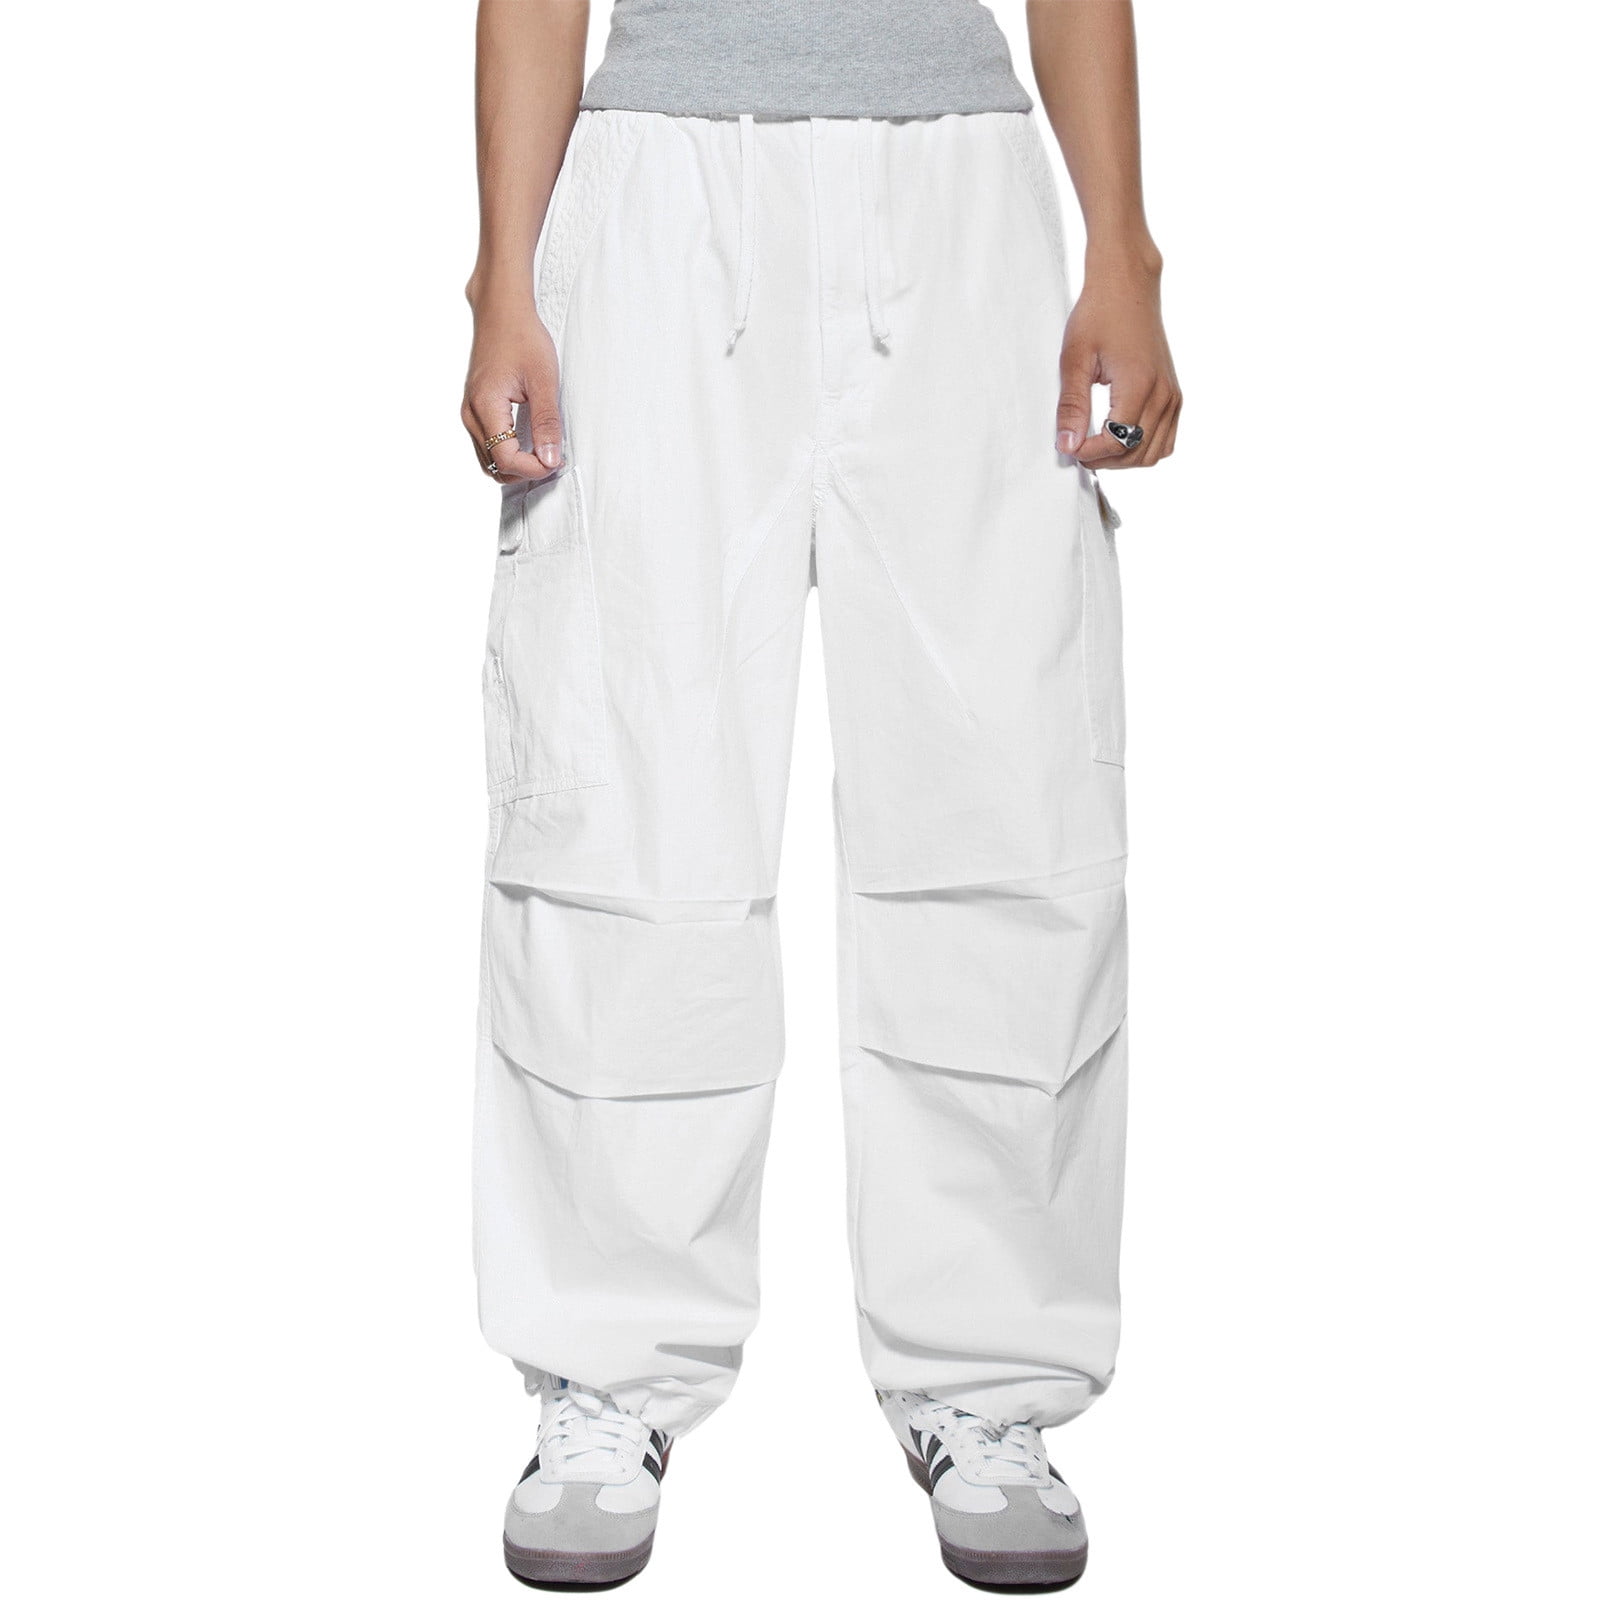 Kddylitq Cargo Pants for Men Relaxed Fit Lightweight Sweatpants ...